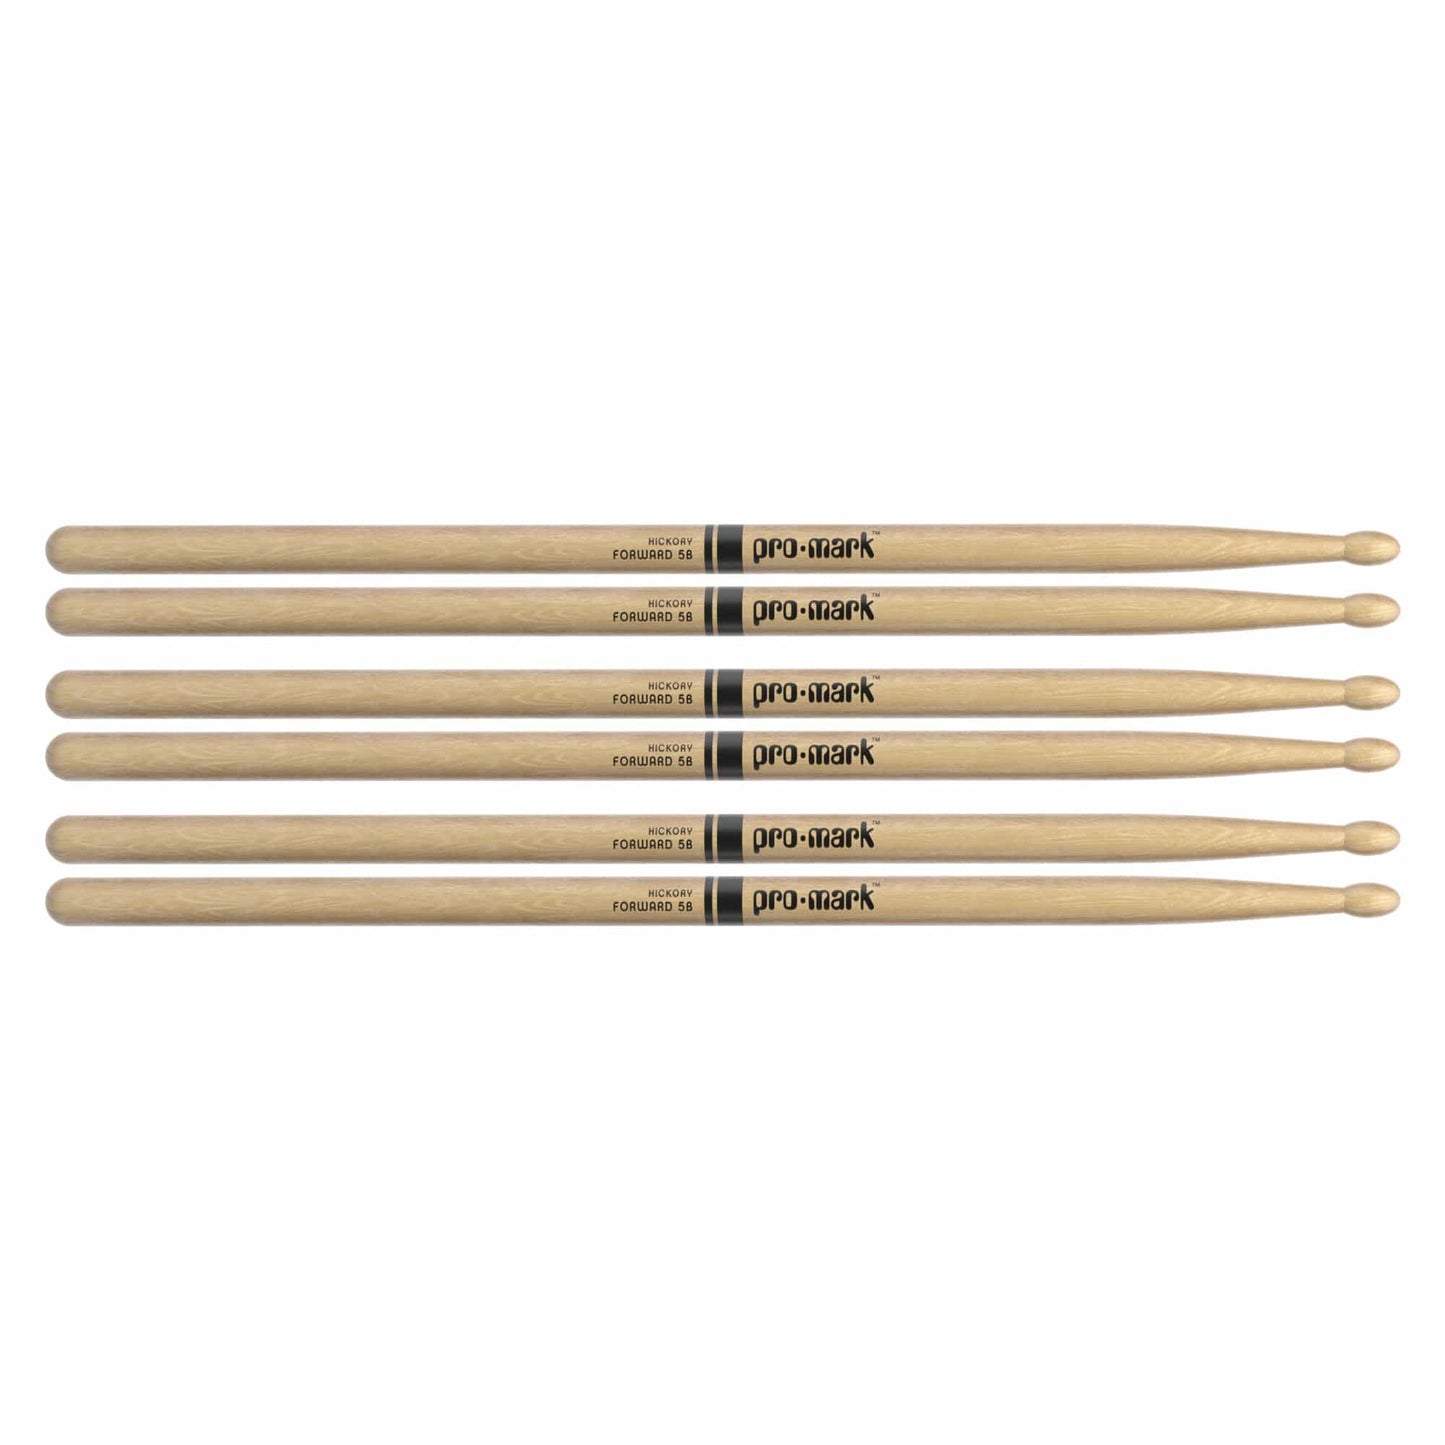 Promark American Hickory 5B Wood Tip Drum Sticks (3 Pair Bundle) Drums and Percussion / Parts and Accessories / Drum Sticks and Mallets